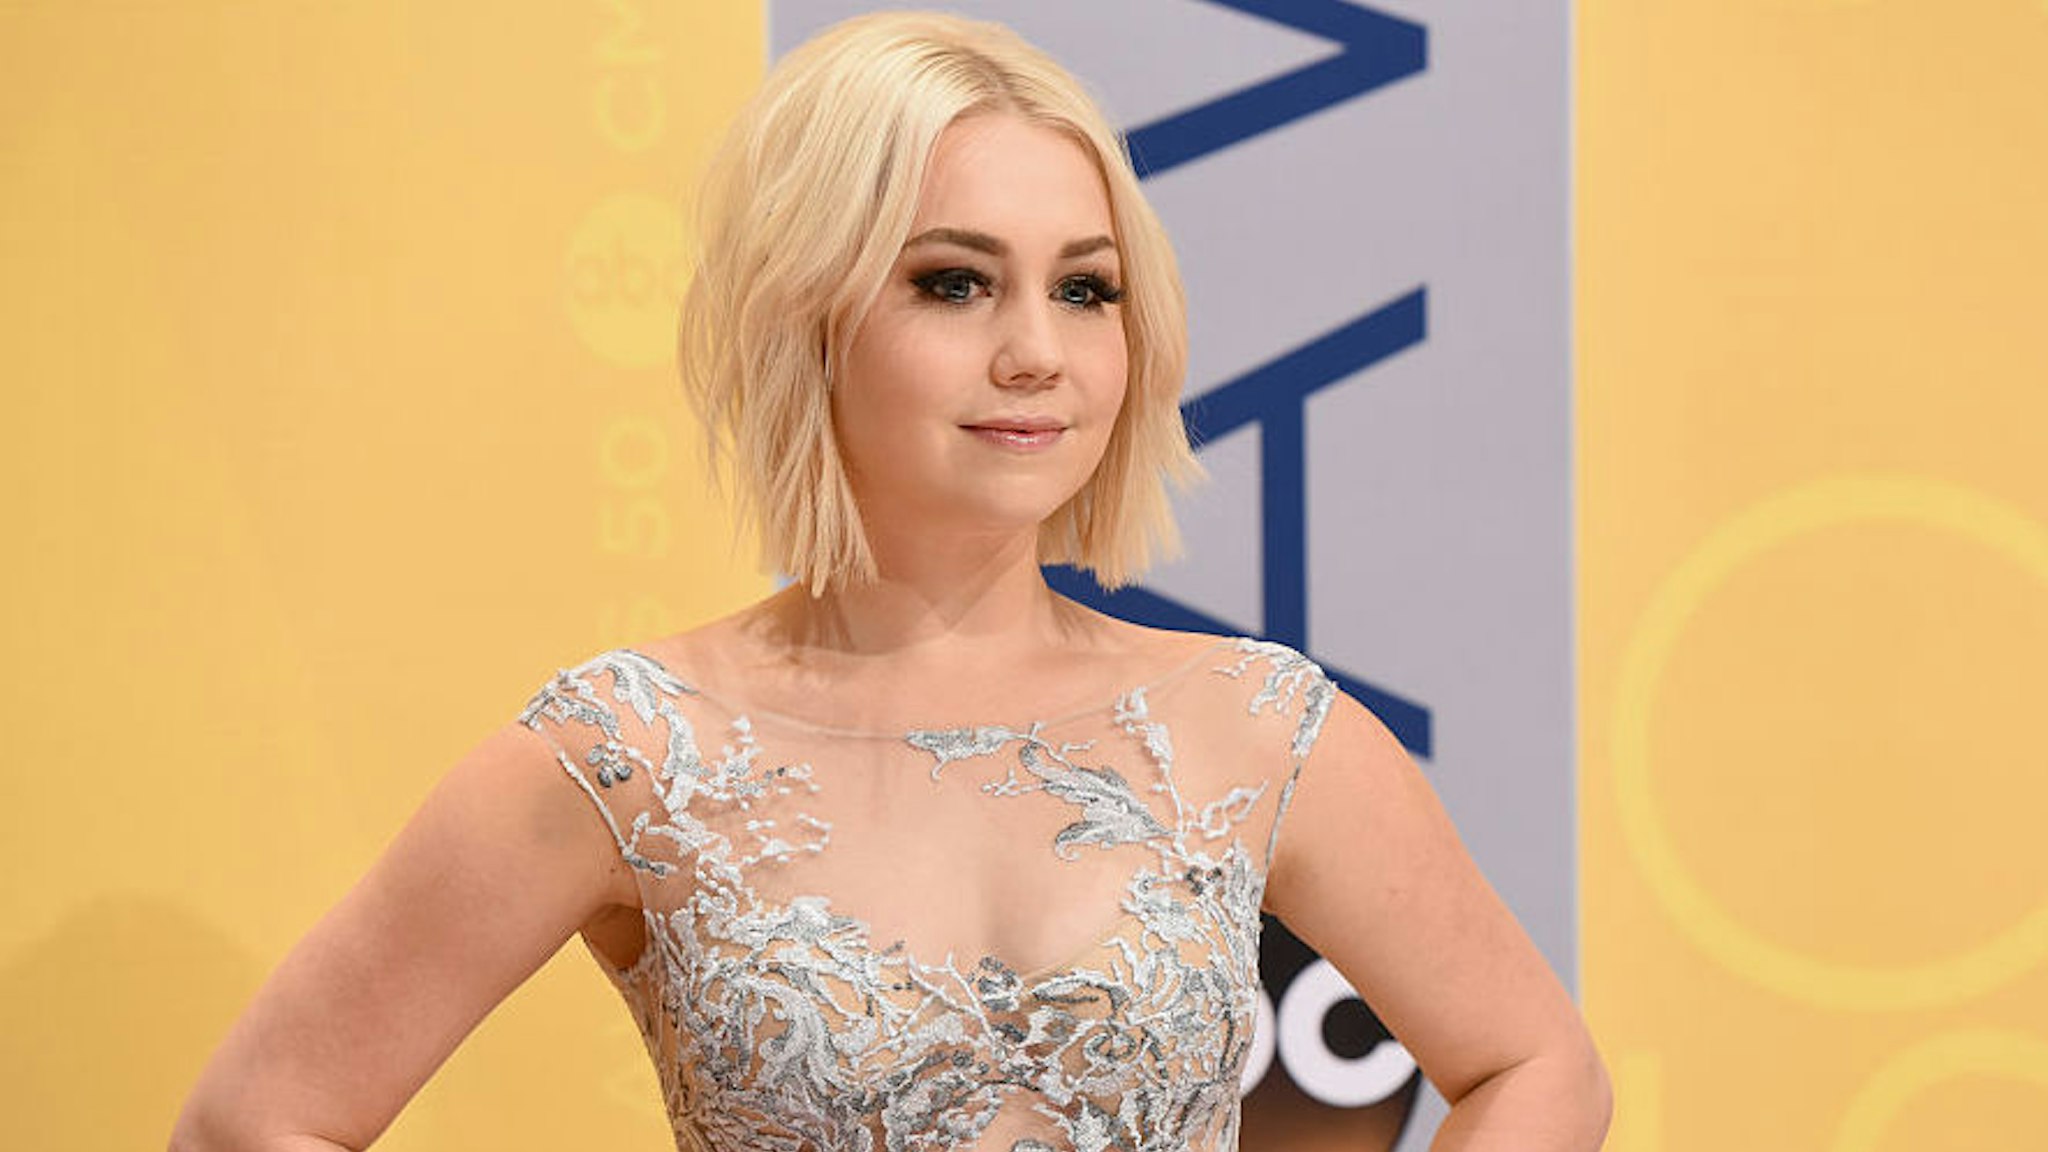 Singer-songwriter Raelynn attends the 50th annual CMA Awards at the Bridgestone Arena on November 2, 2016 in Nashville, Tennessee.